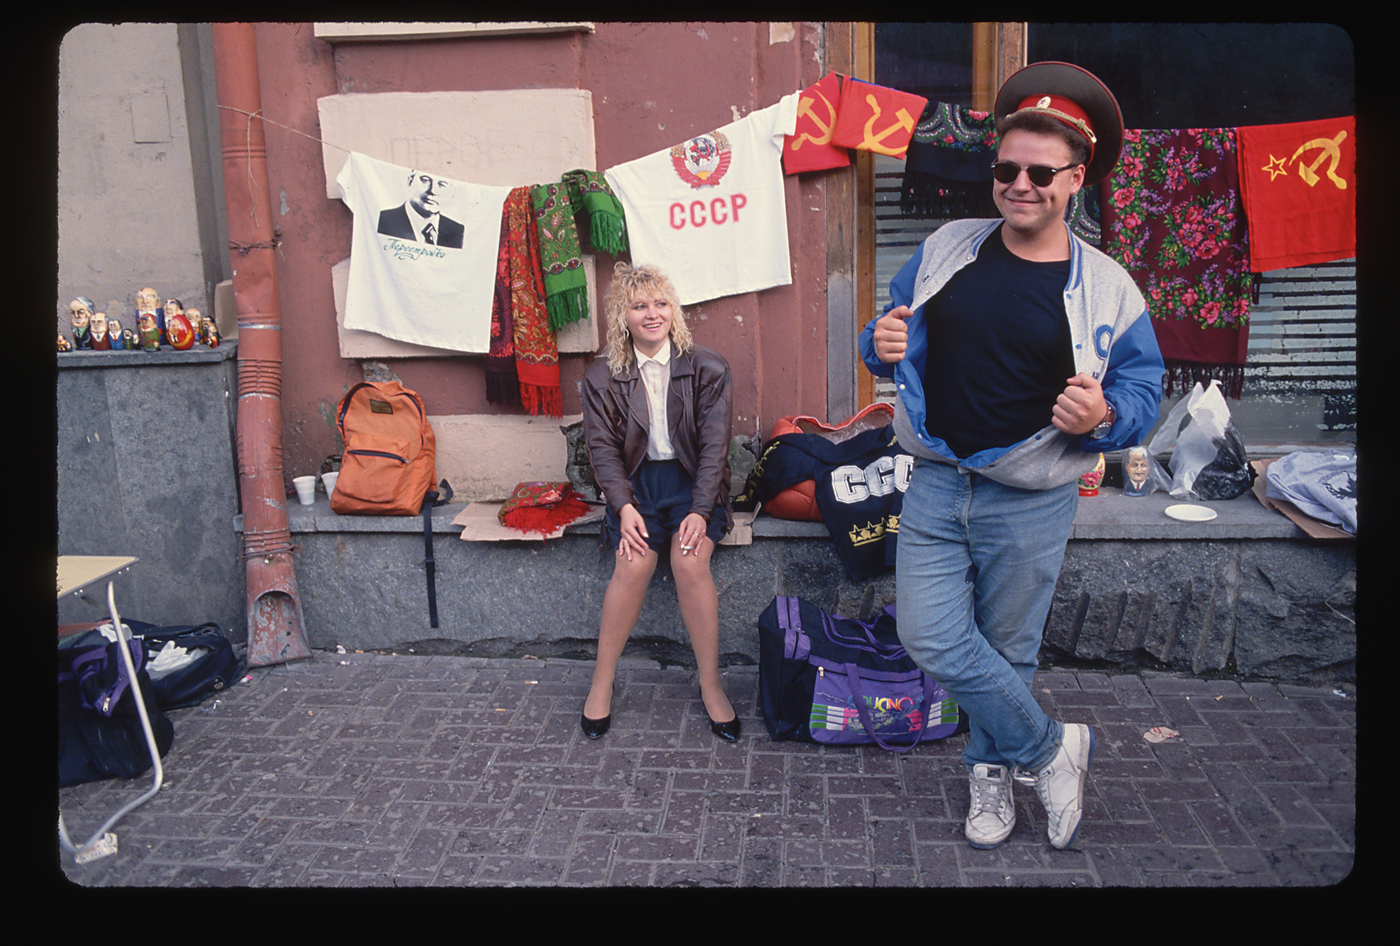 A woman and man in western style clothing near a collection of Soviet and Russian souvenirs on Arbat street, Moscow in 1991. Souvenir items include t-shirts displaying CCCP and photo of Mikhail Gorbachev. 